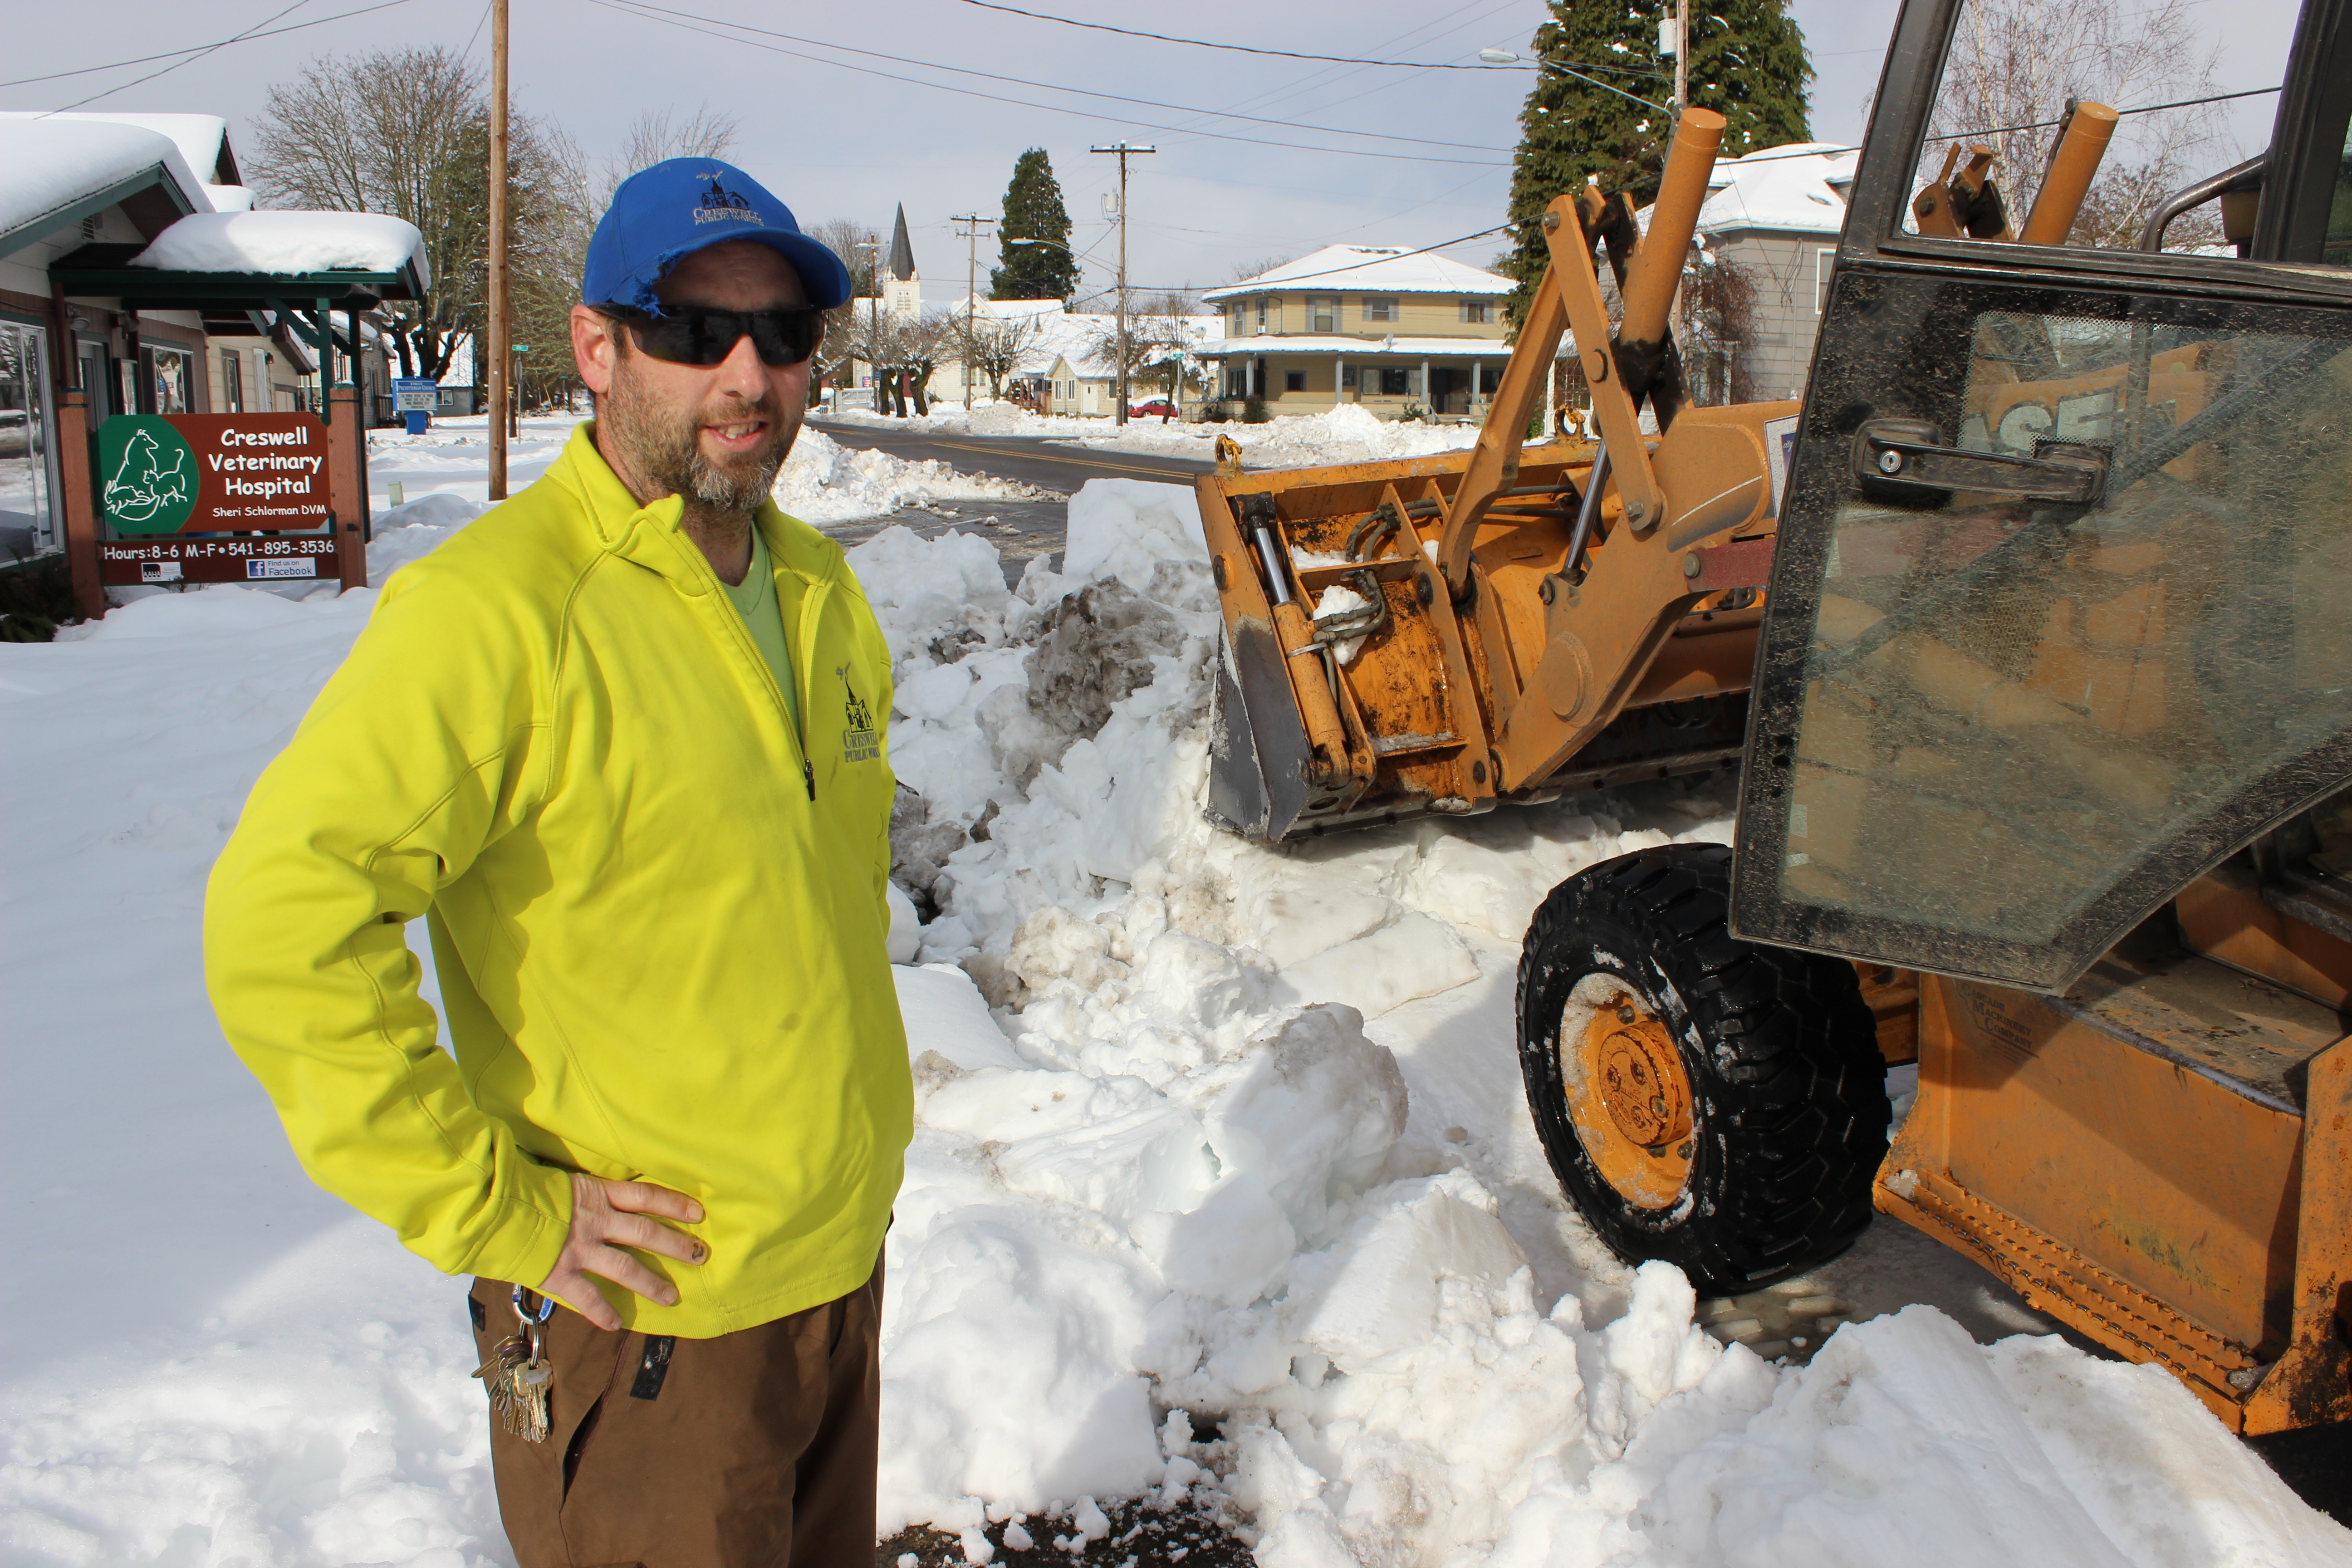 Image of Creswell Public Works employee Mitch working during a very snowy day